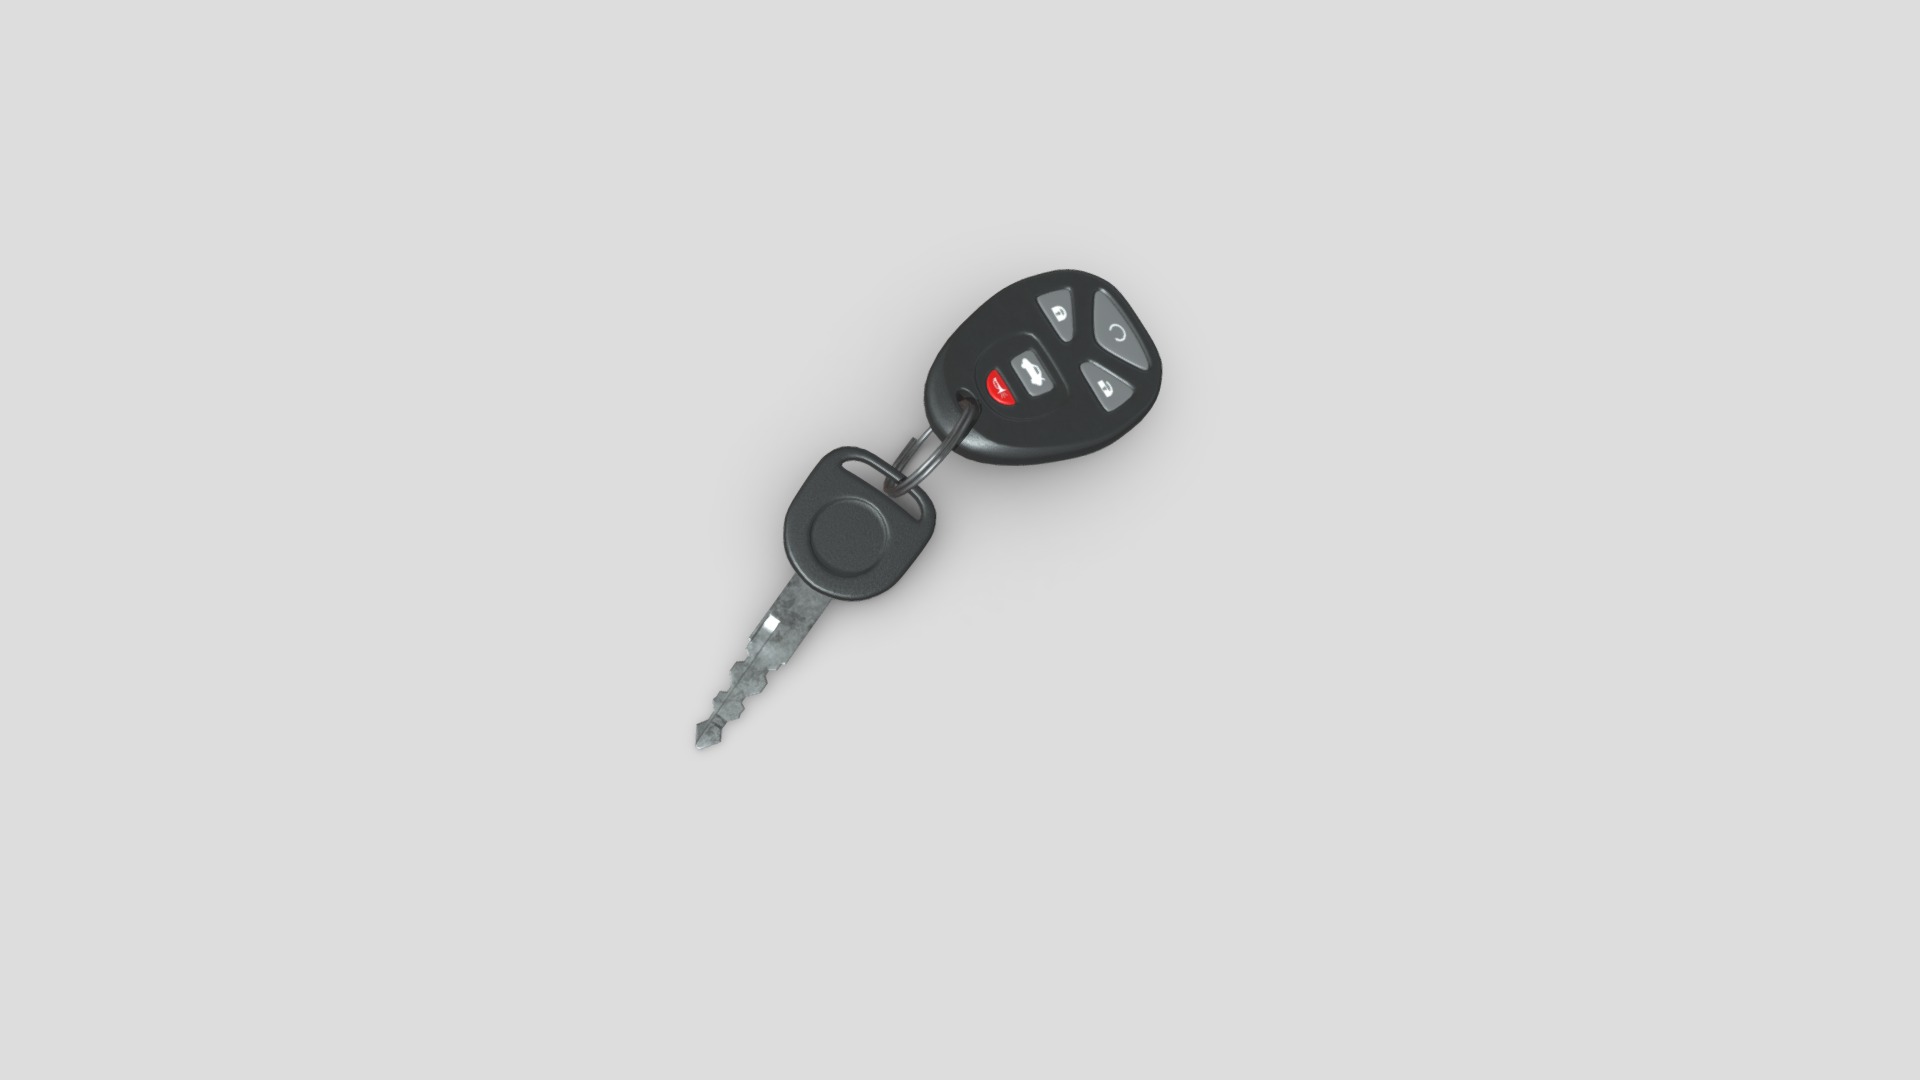 3D model Car Key - This is a 3D model of the Car Key. The 3D model is about a black and white video game controller.